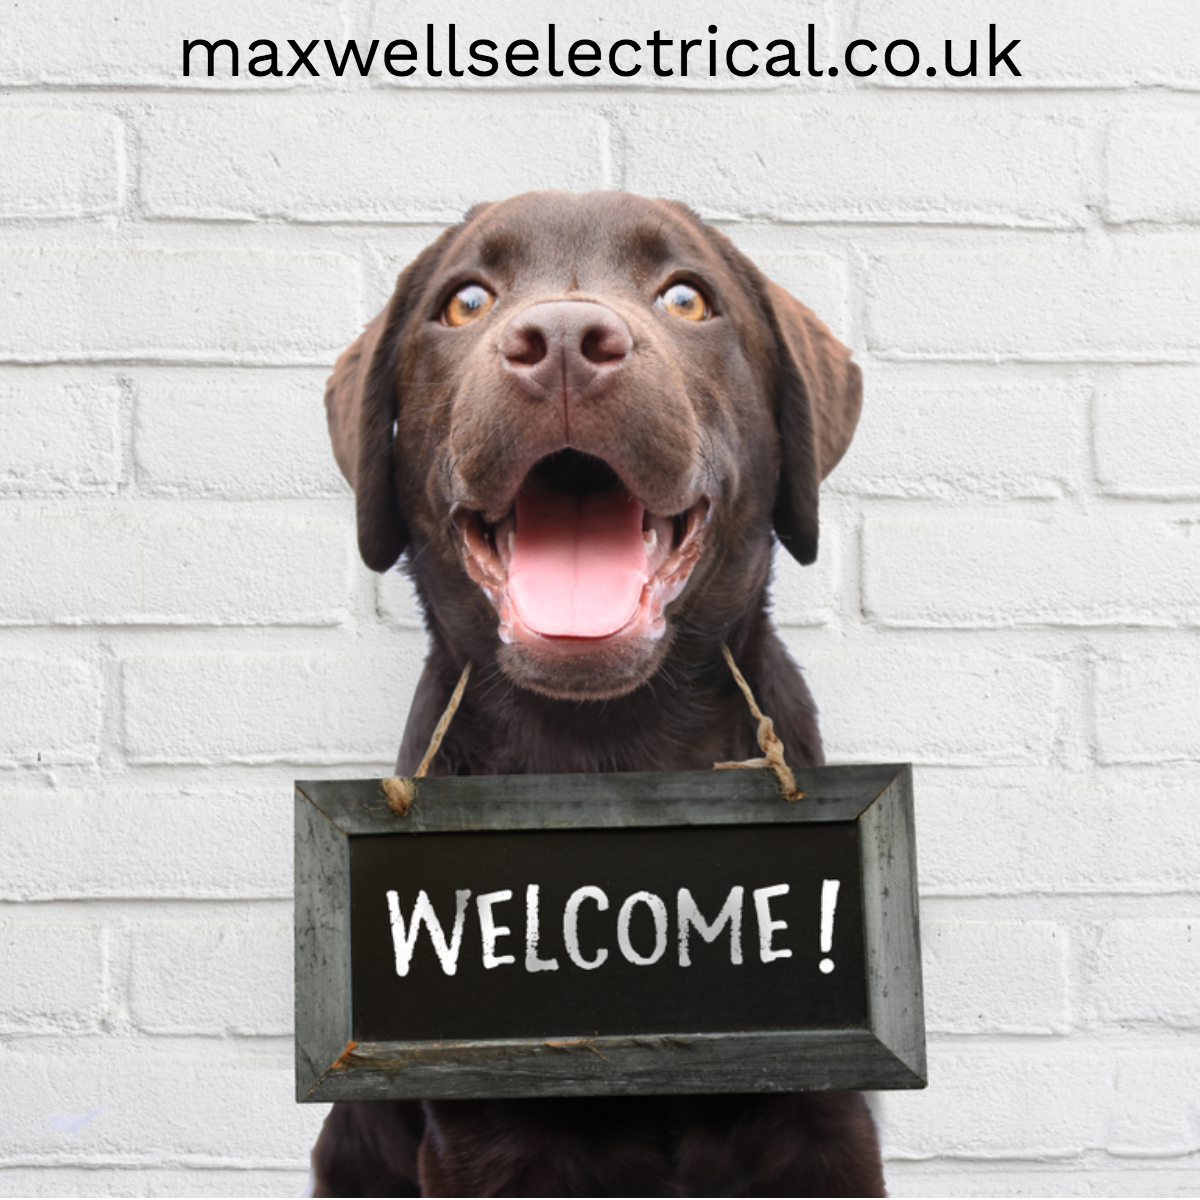 We are dog friendly! Bring your canine friends for @Lovenorthallerton DogDayz weekend in Northallerton 
They get fuss and treats while you shop!
Buy in store or online today maxwellselectrical.co.uk
#KitchenAppliances #TVandEntertainment #DogFriendlyShop #FreeLocalDelivery